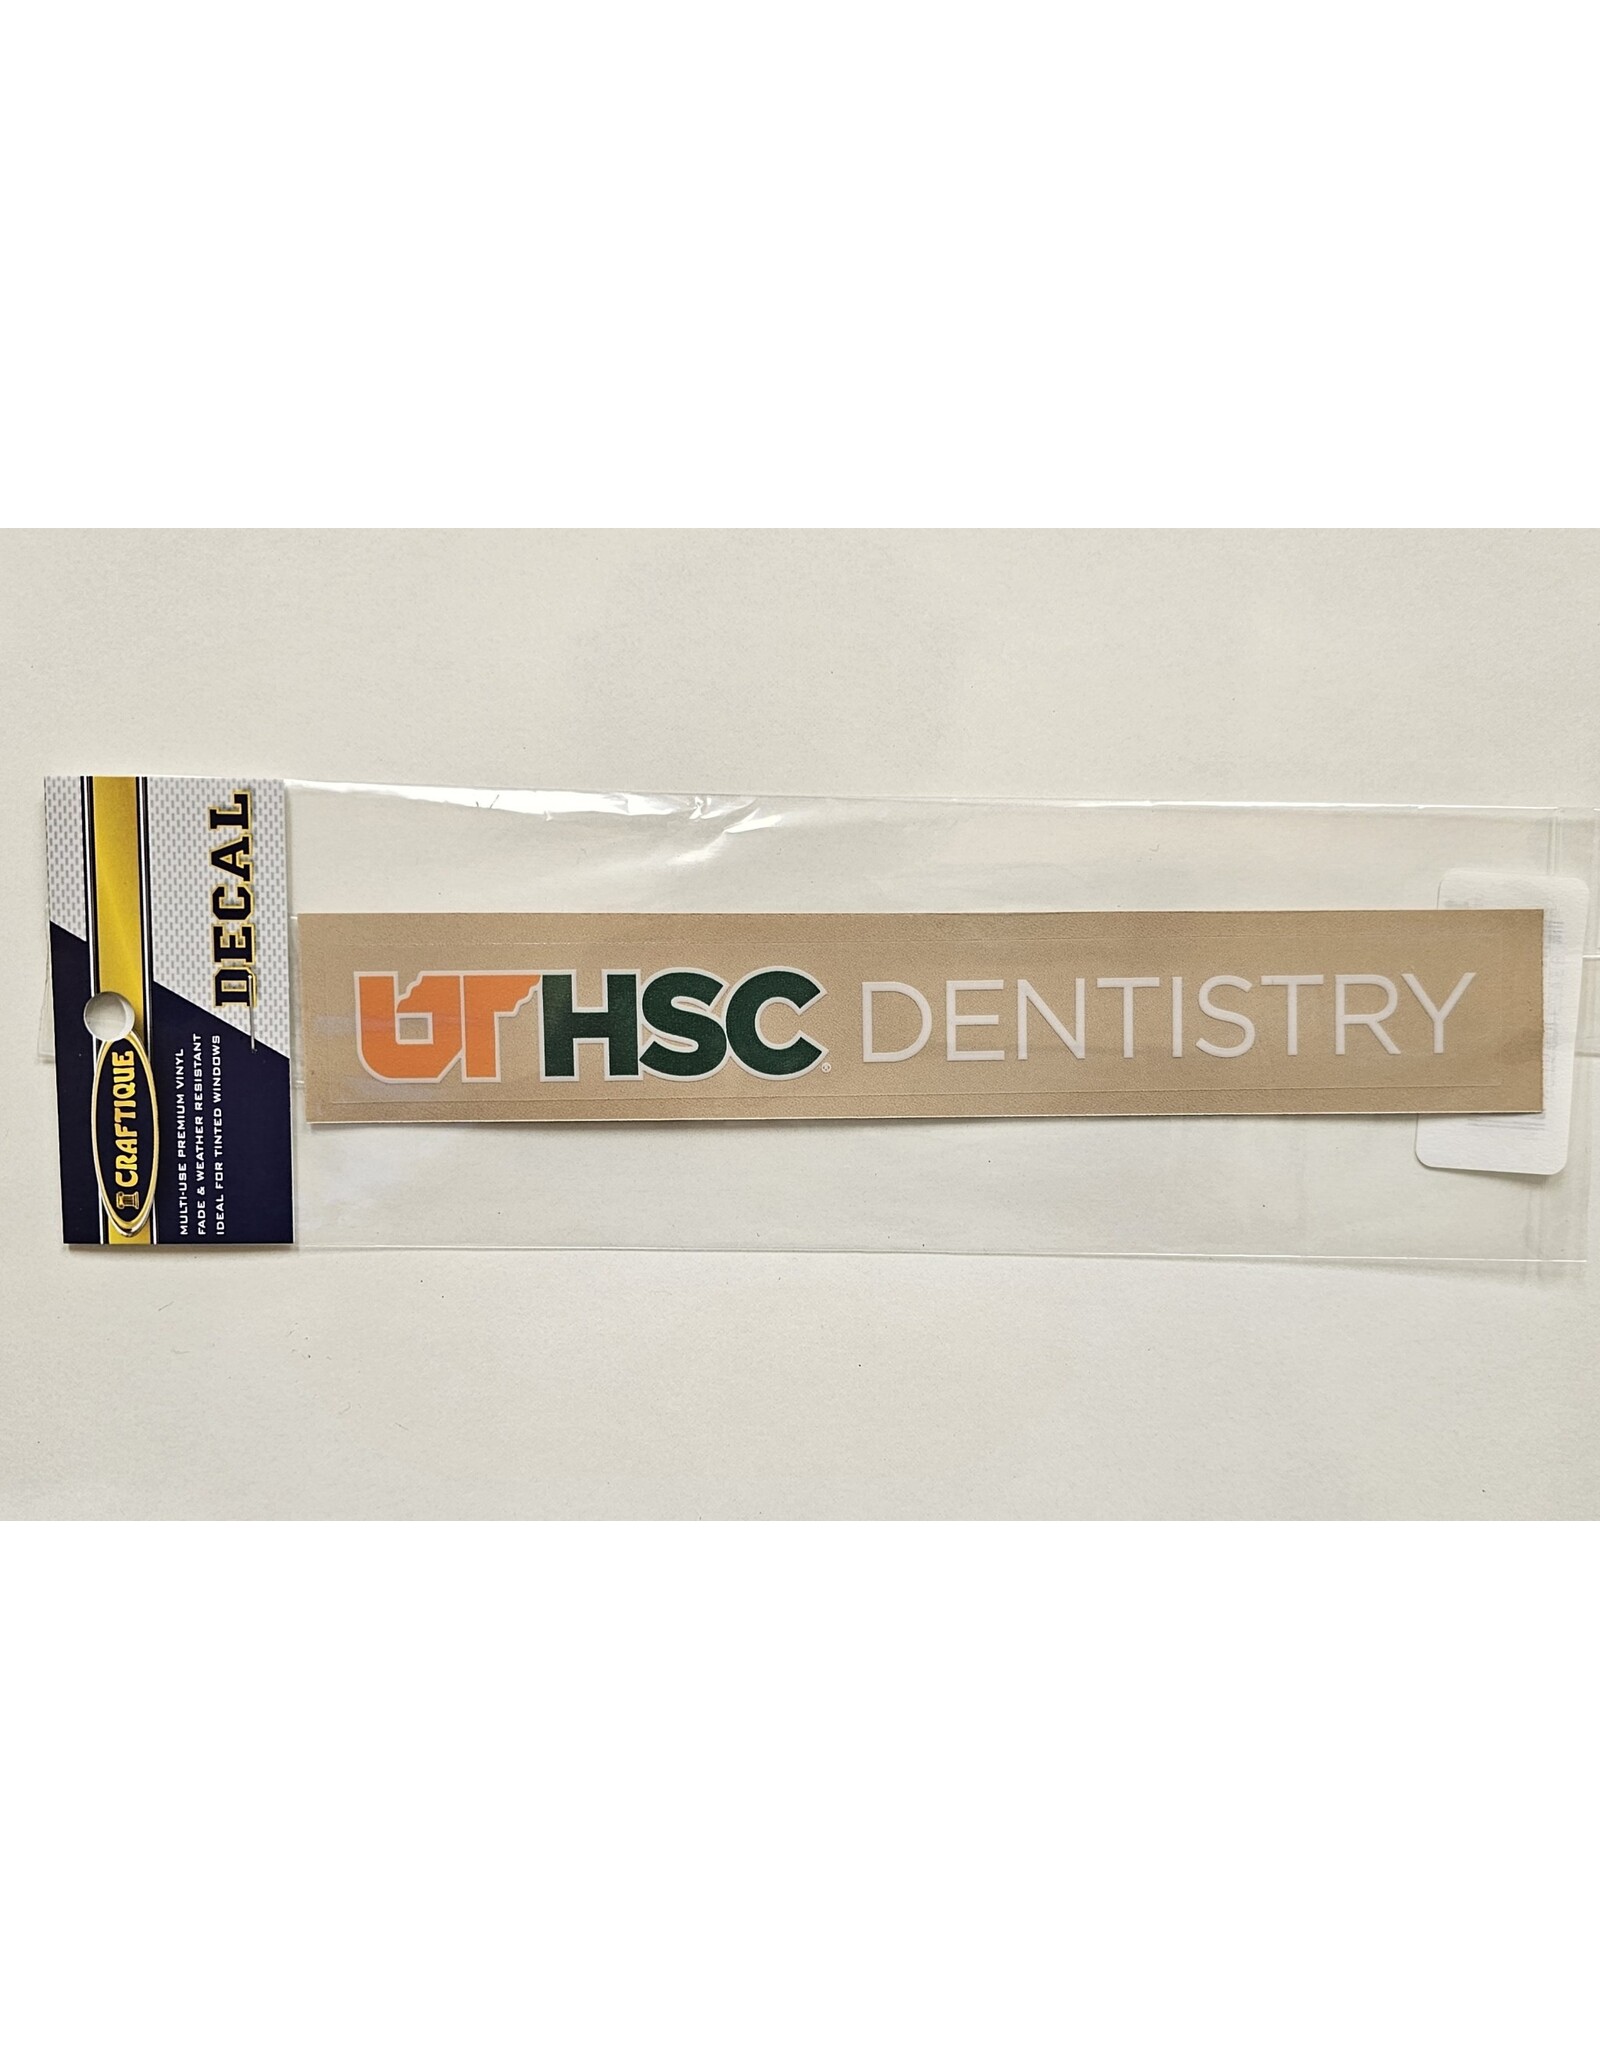 CRAFTIQUE DENTISTRY DECAL 6"